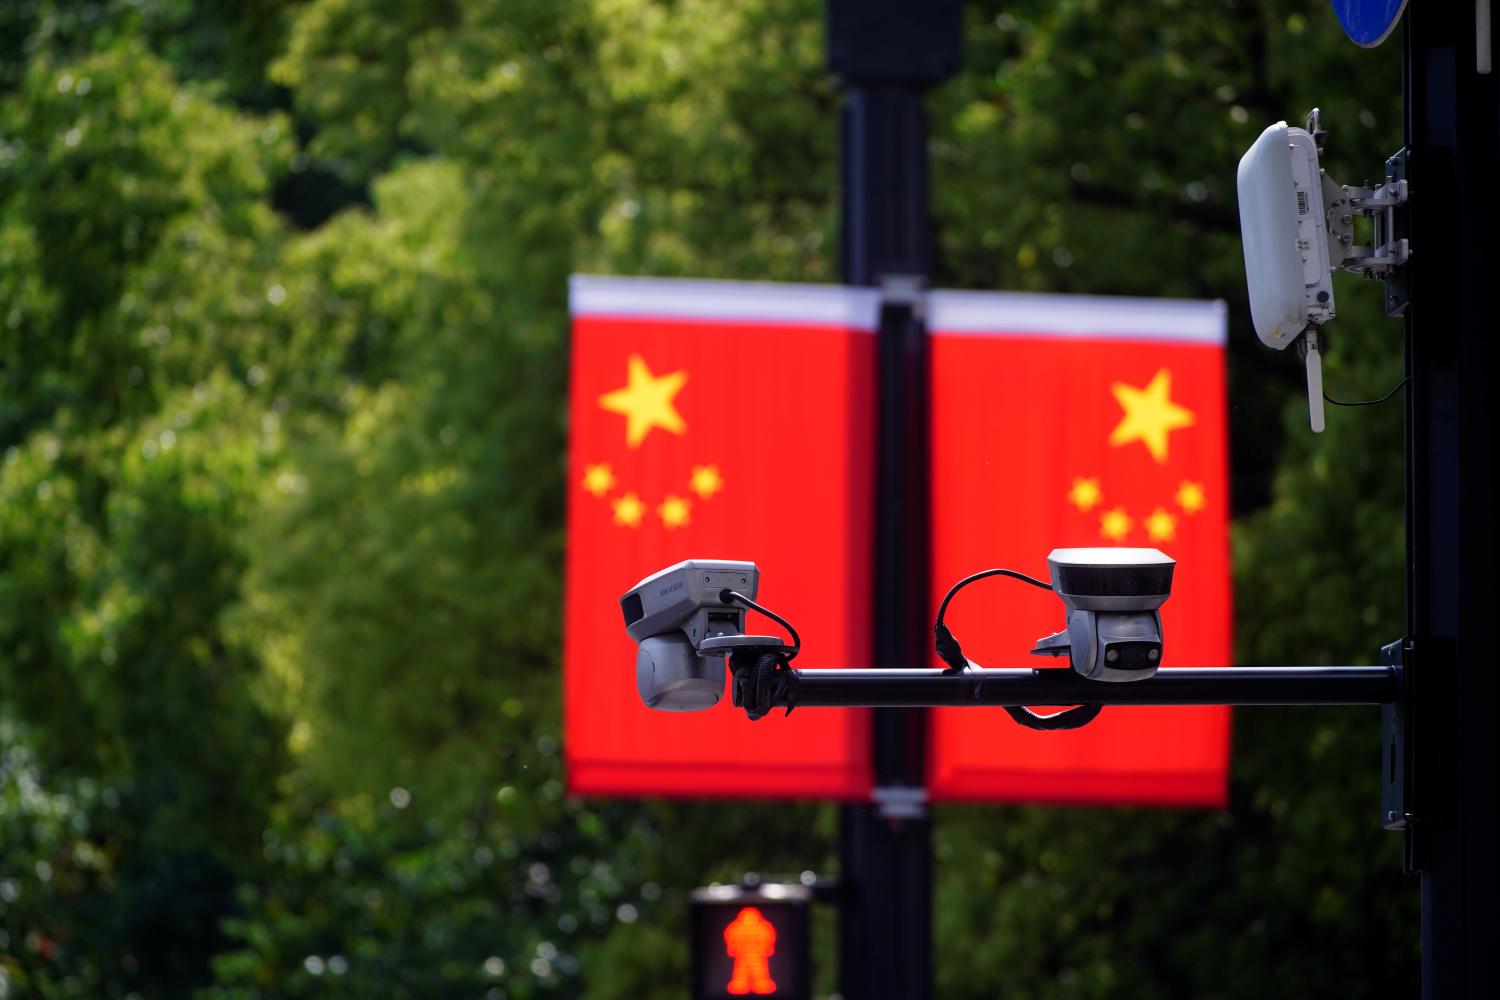 Surveillance cameras are seen mounted in front of two Chinese flags.